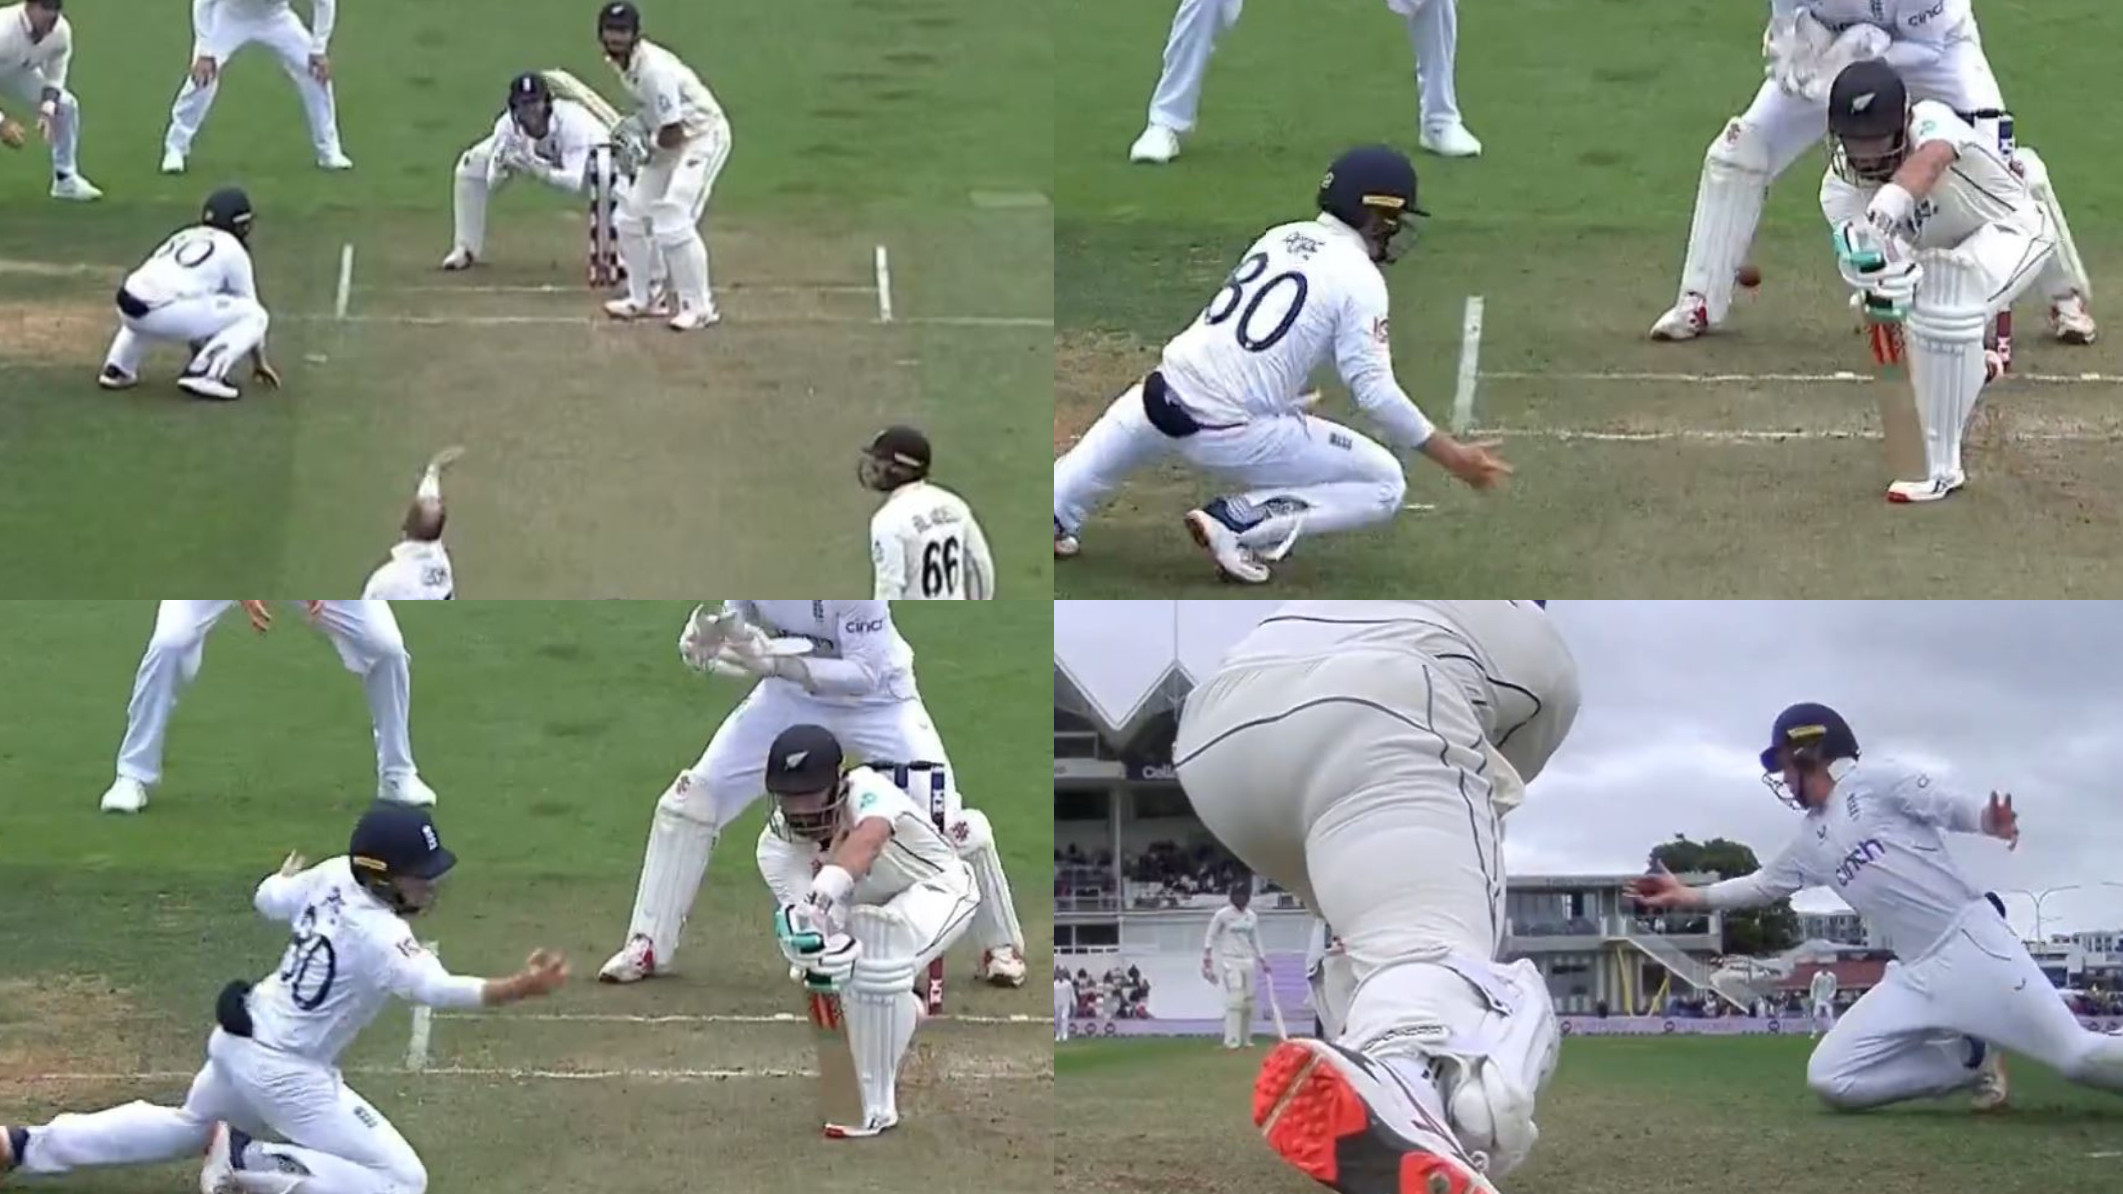 NZ v ENG 2023: WATCH- Ollie Pope shines at silly point; takes amazing reflex catch of Daryl Mitchell